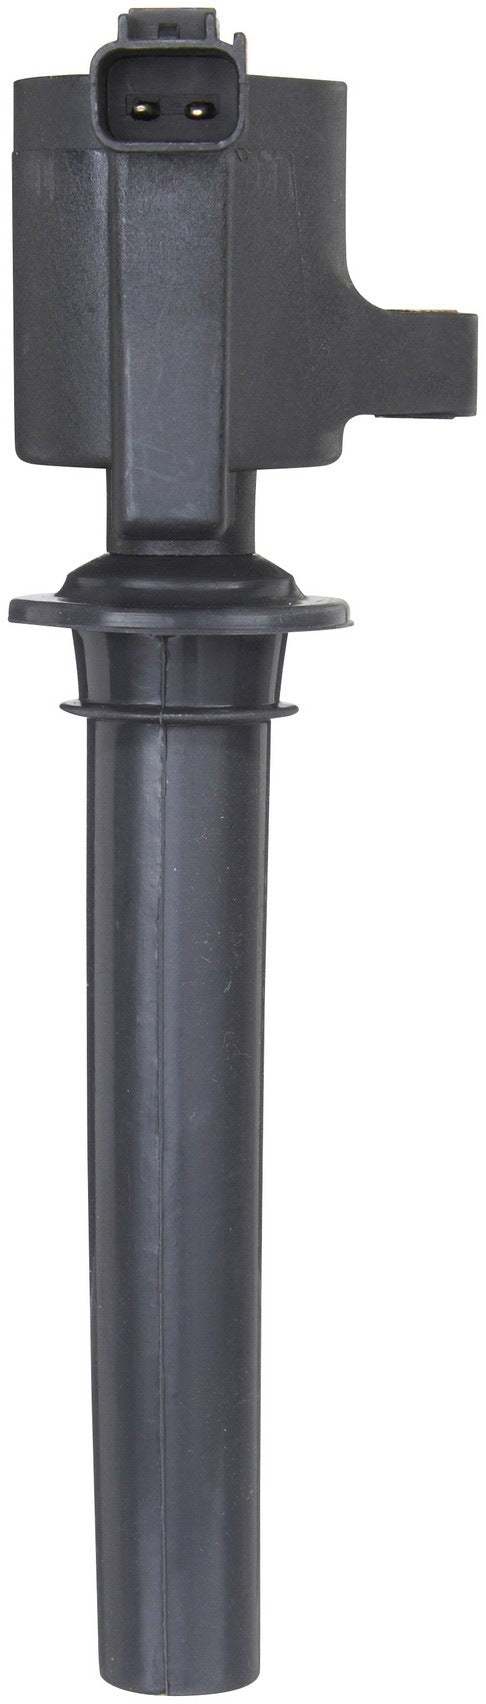 Front View of Ignition Coil SPECTRA C-513